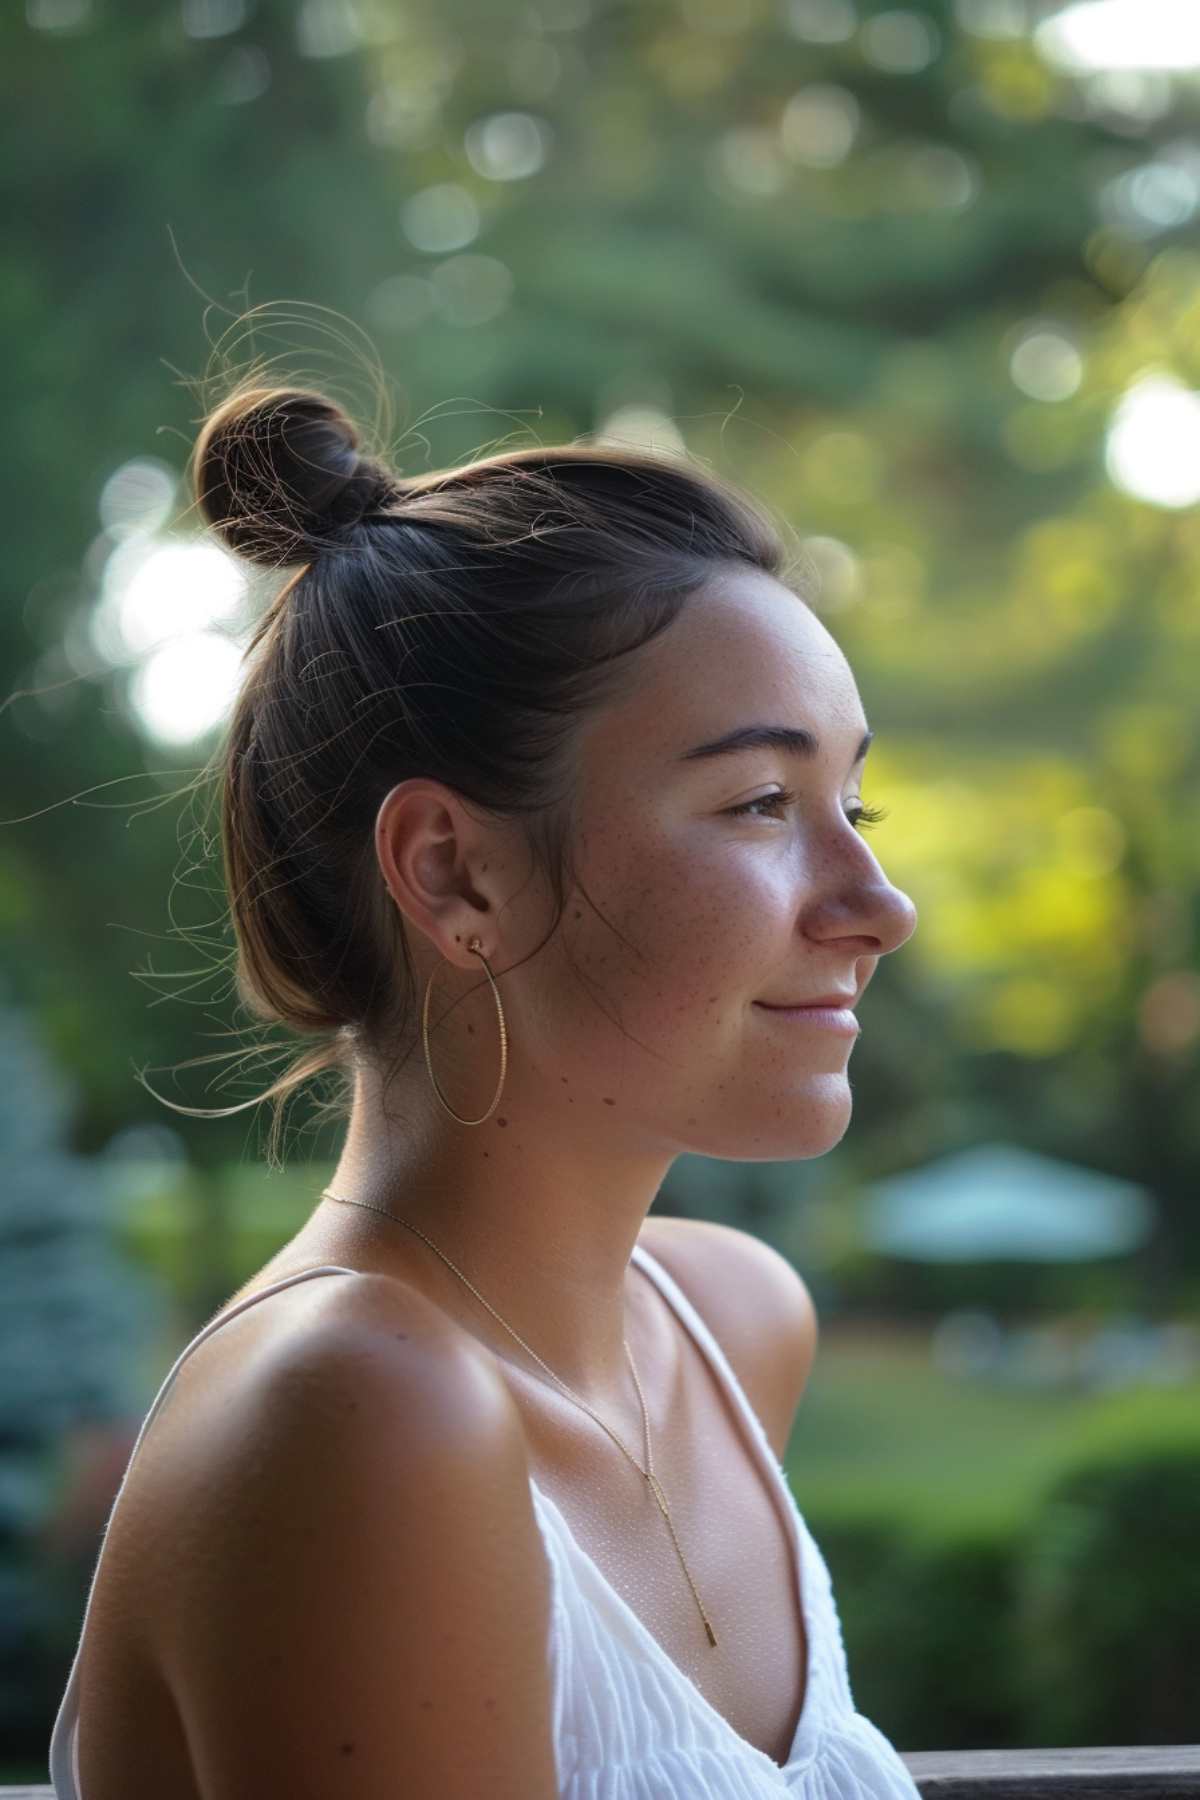 Woman with low maintenance top knot hairstyle for hot weather